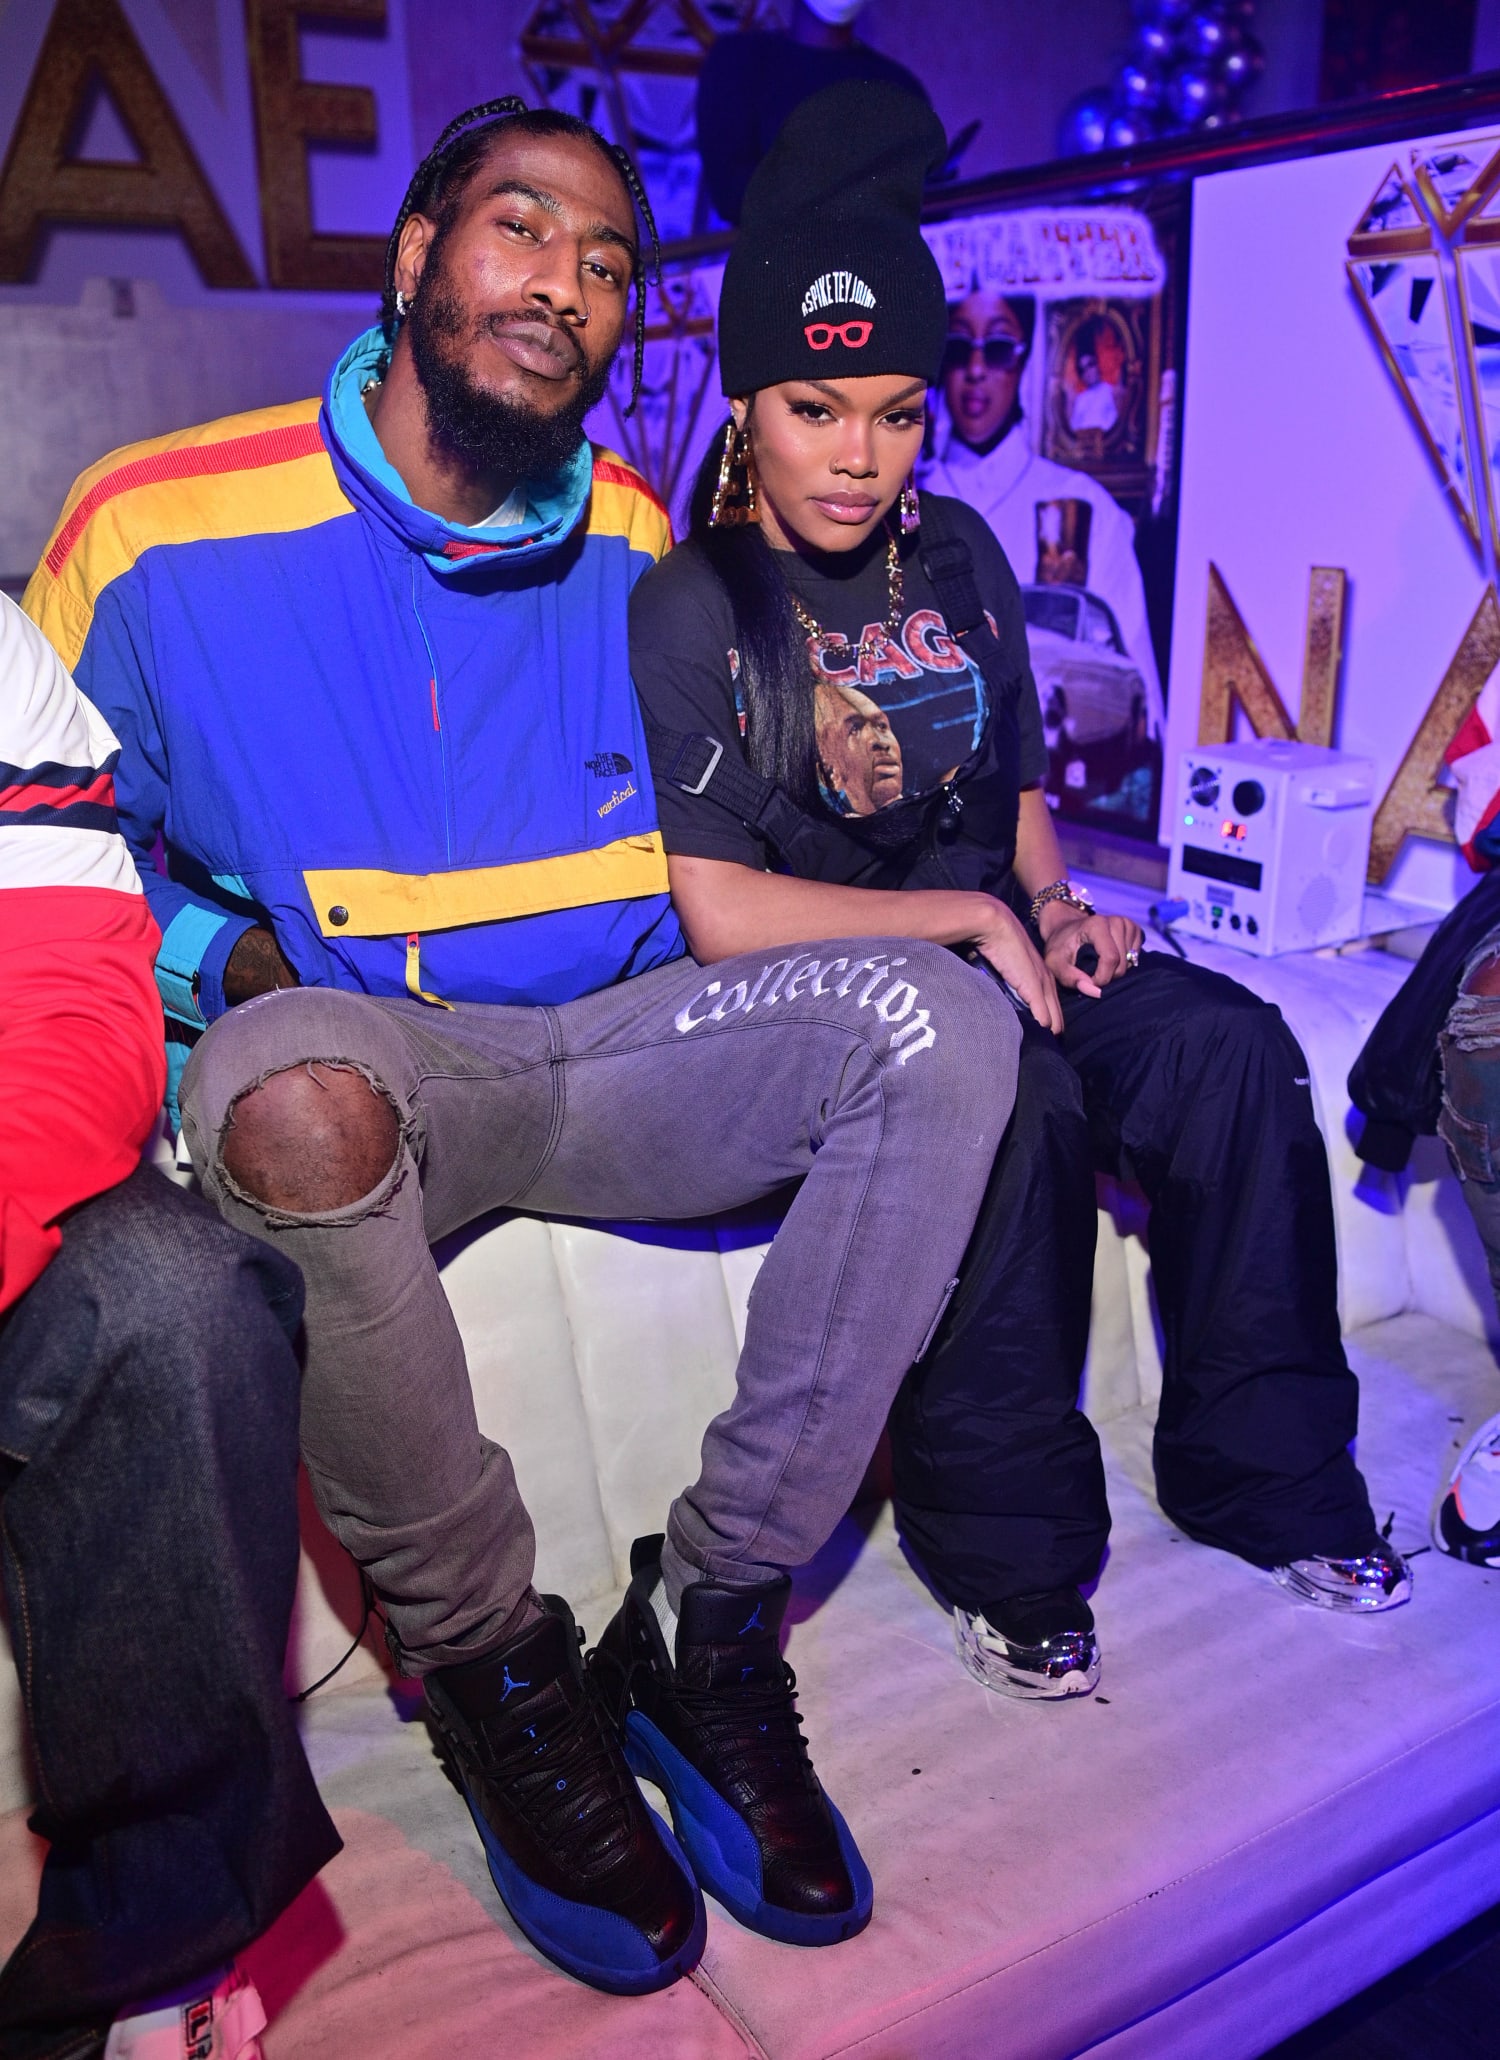 Teyana Taylor and Iman Shumpert To Star in New Reality Show - The